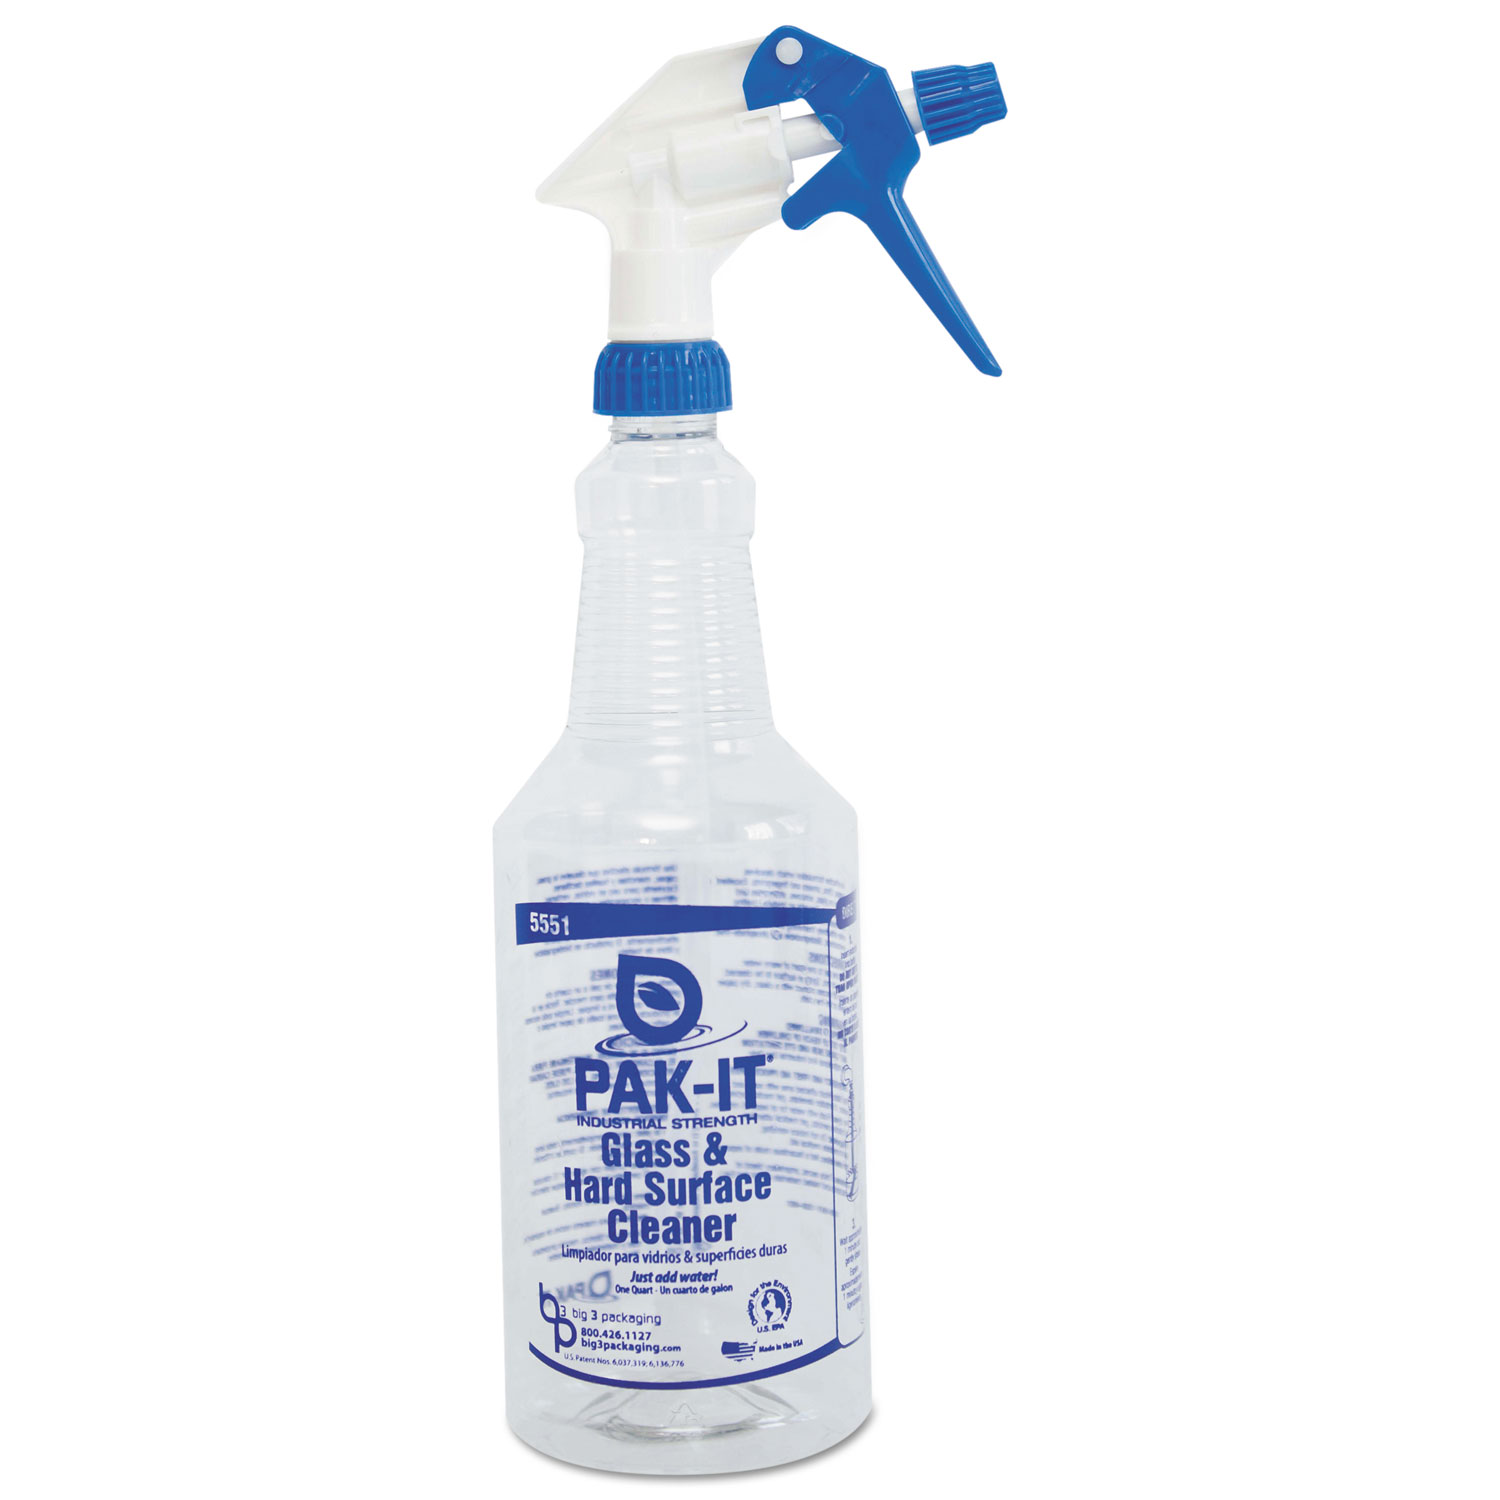 Empty Color-Coded Trigger-Spray Bottle, 32 oz, for Glass/Hard Surface Cleaner